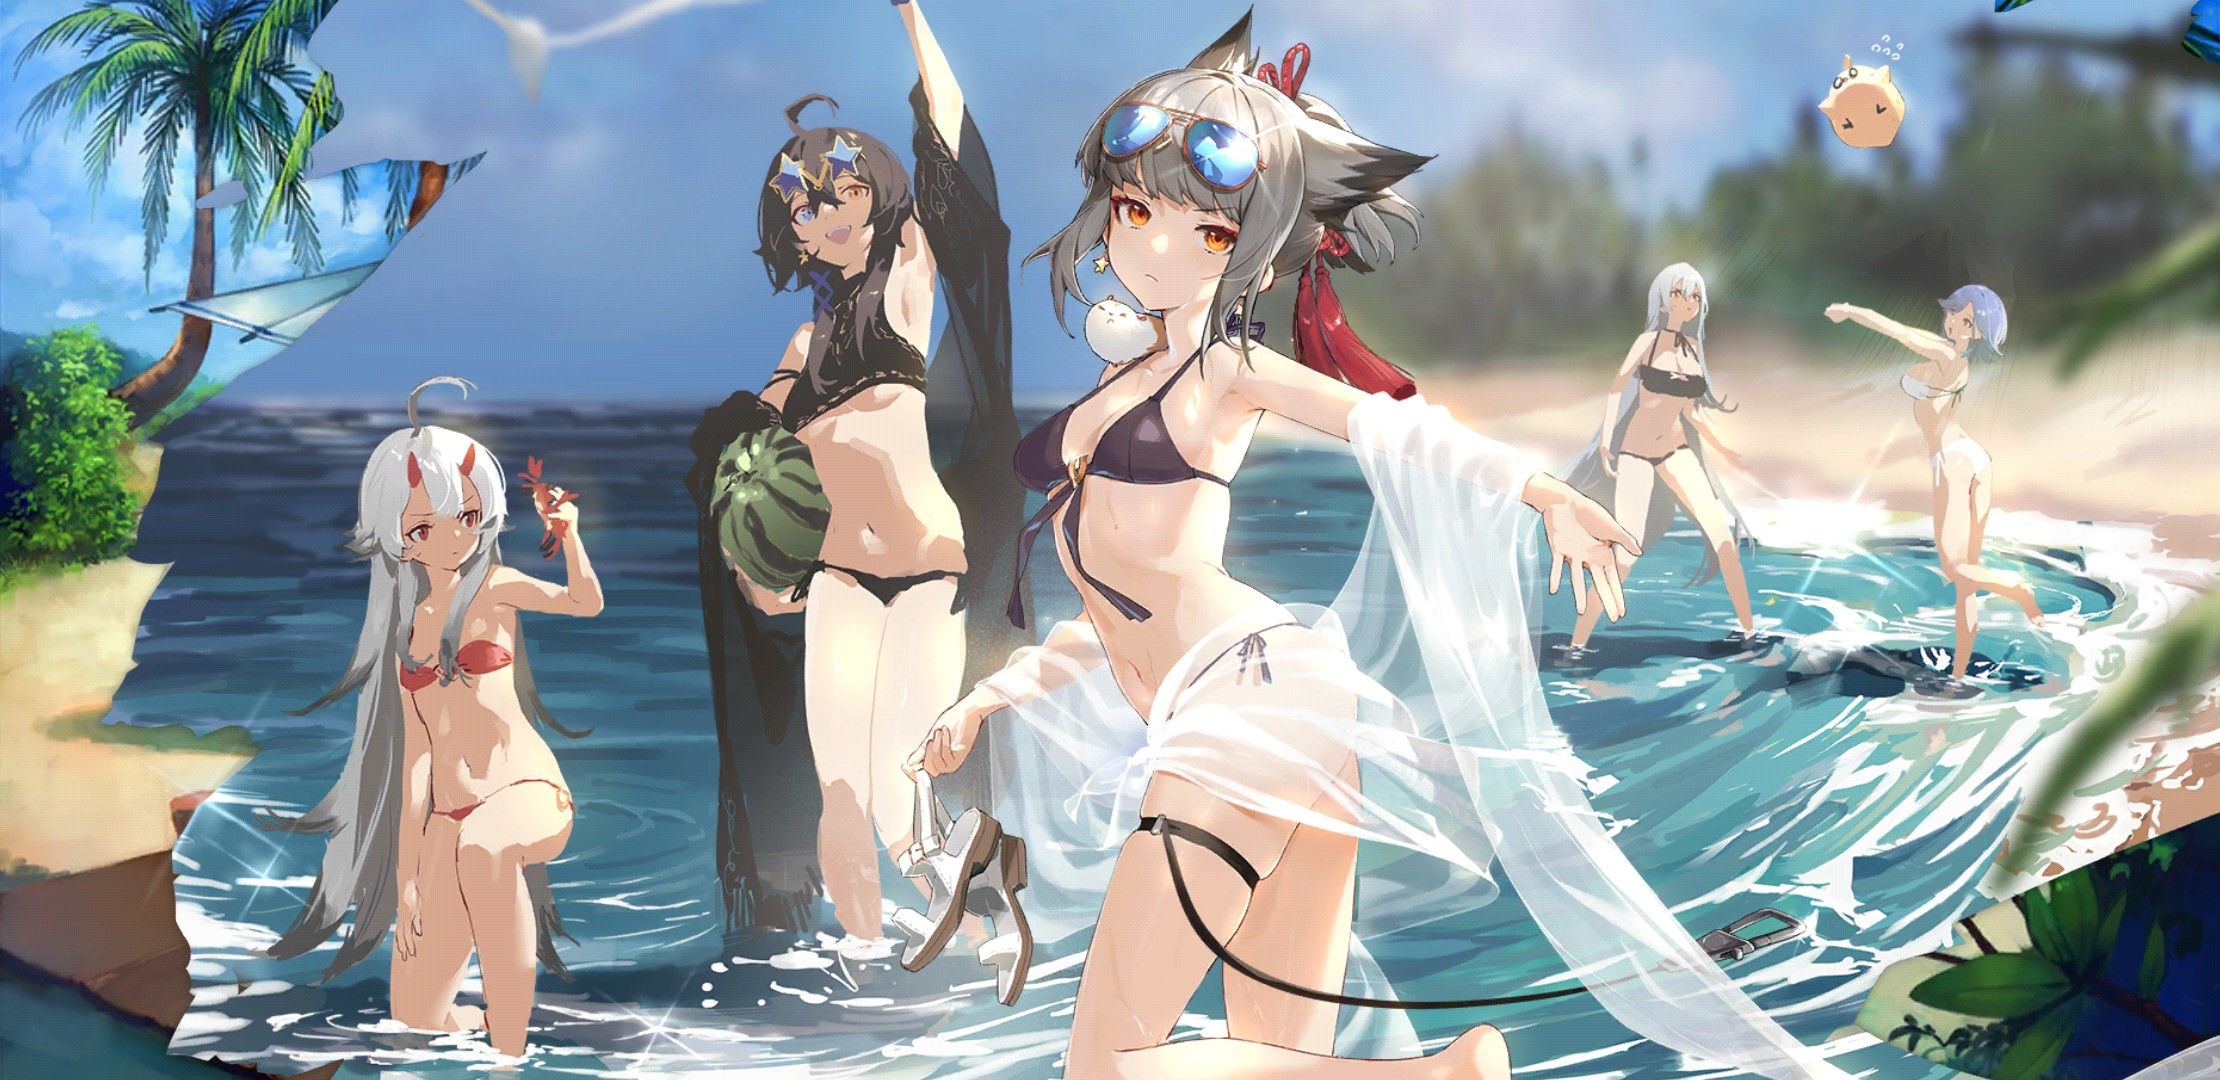 【There is an image】 Smartphone that urges charging with erotic swimsuits is malicious 7